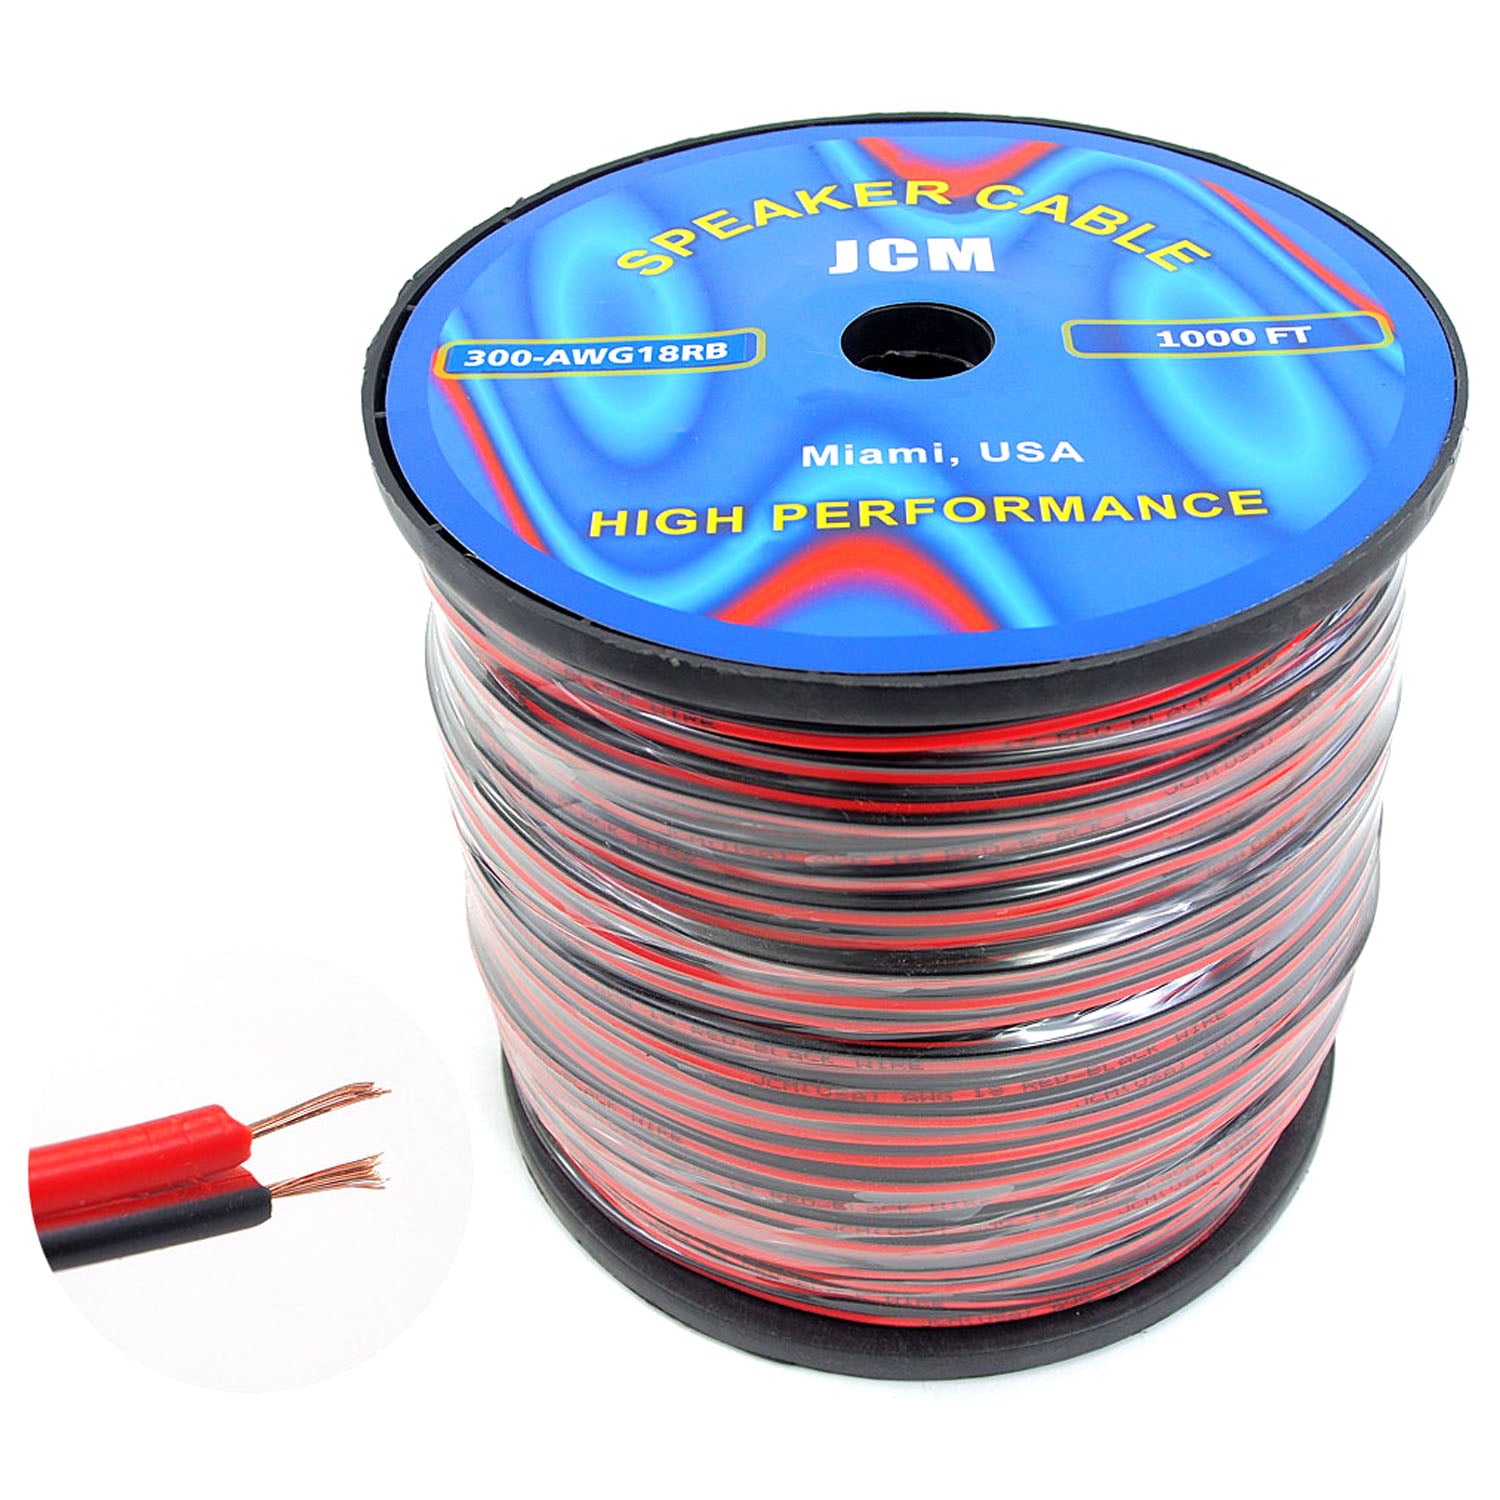 300-AWG18/RB 1KFT 18GA 2C R/B Spek Cable